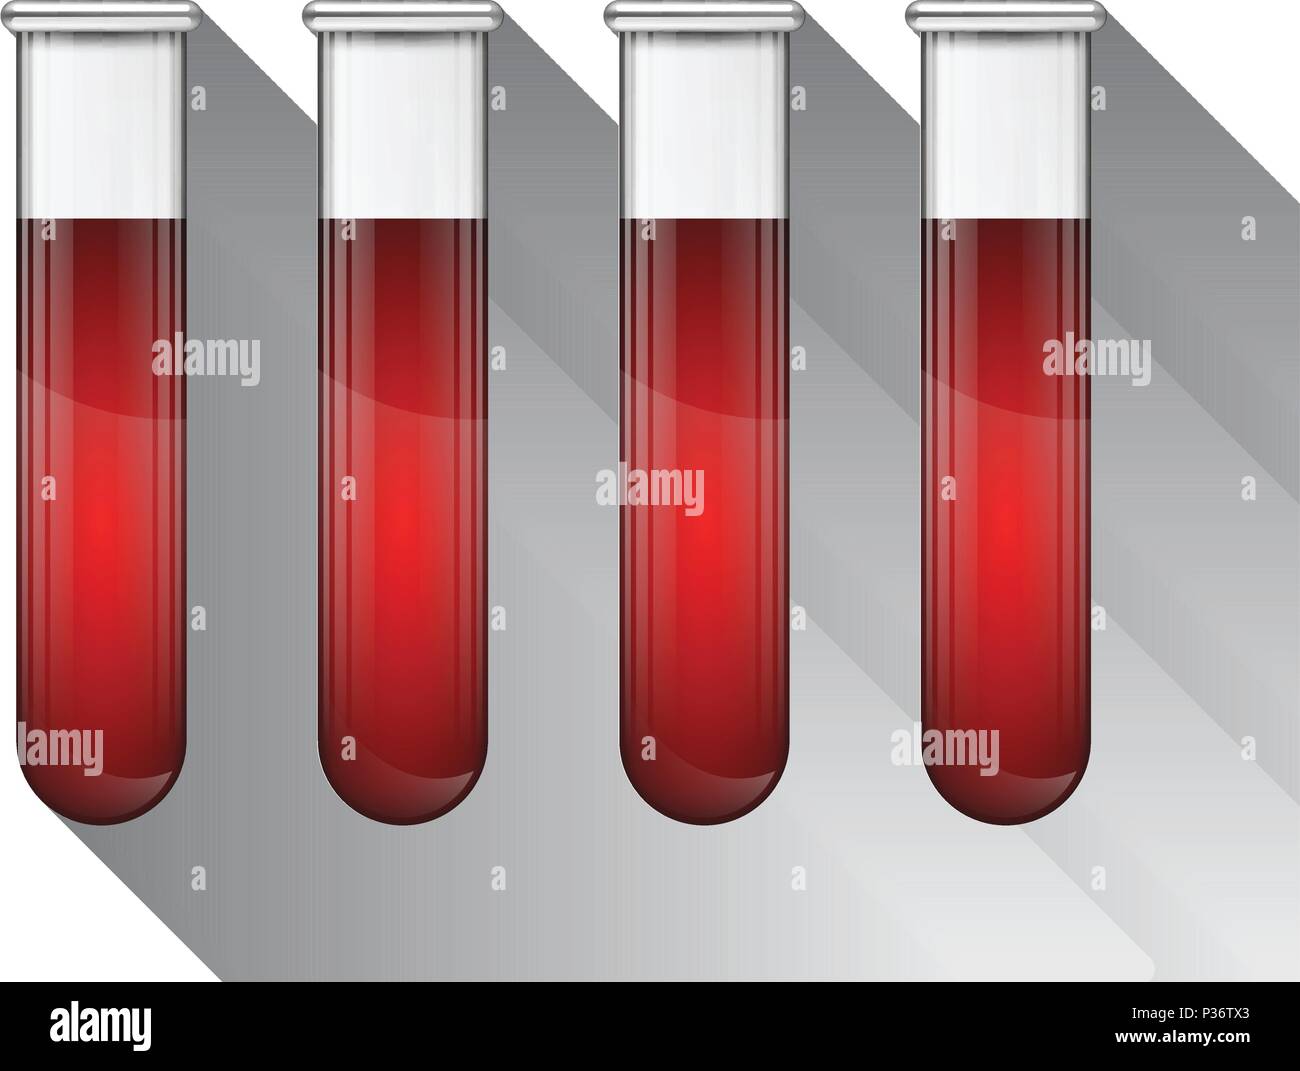 Different blood in test tube illustration Stock Vector